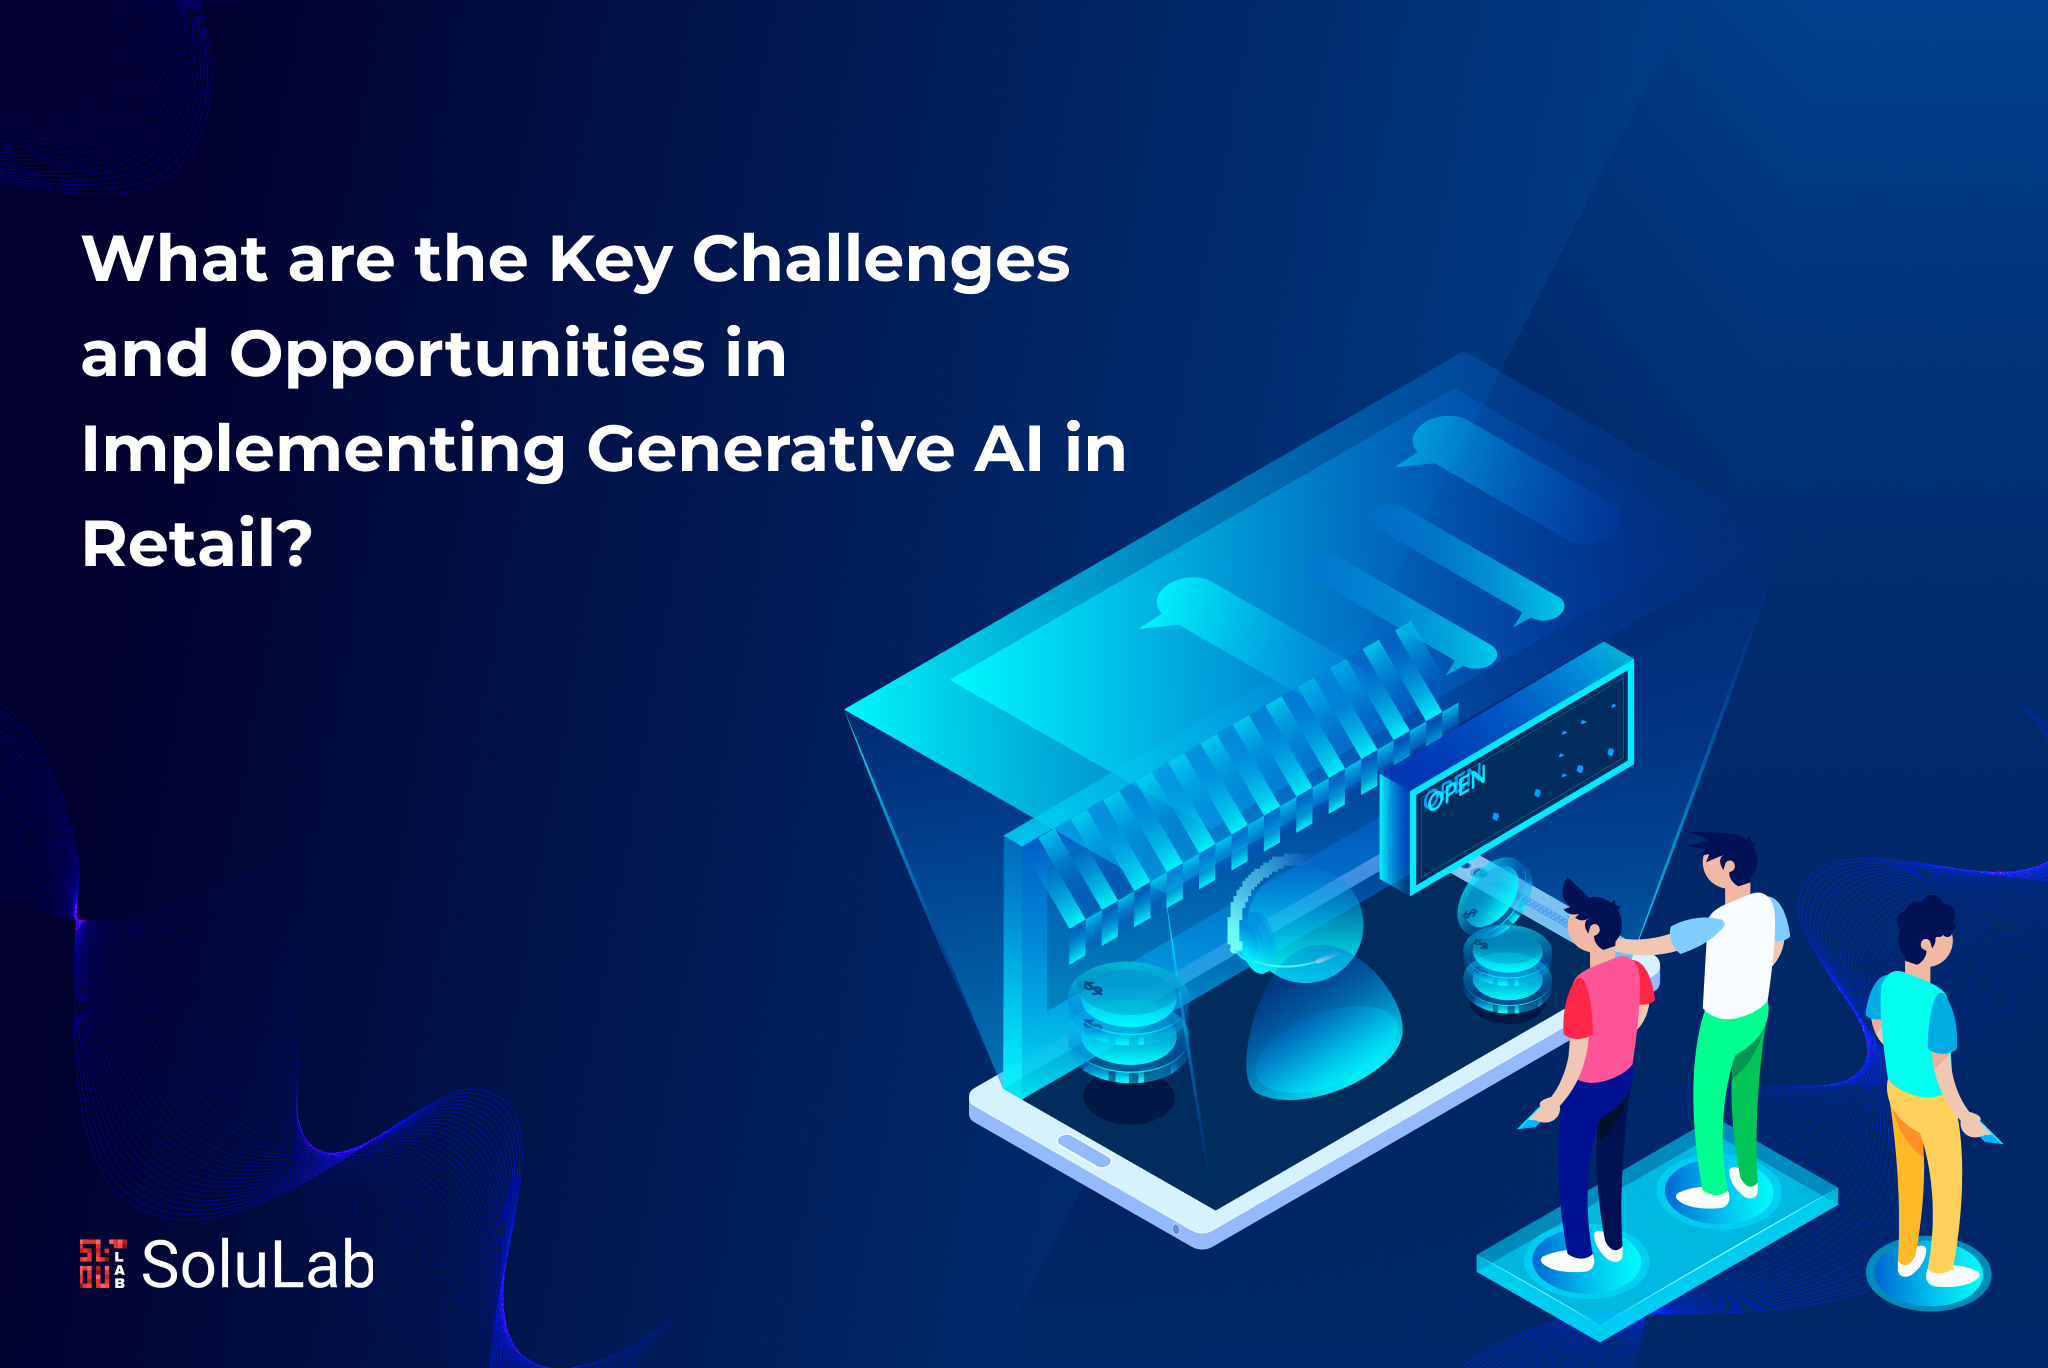 What are the Key Challenges and Opportunities in Implementing Generative AI in Retail?